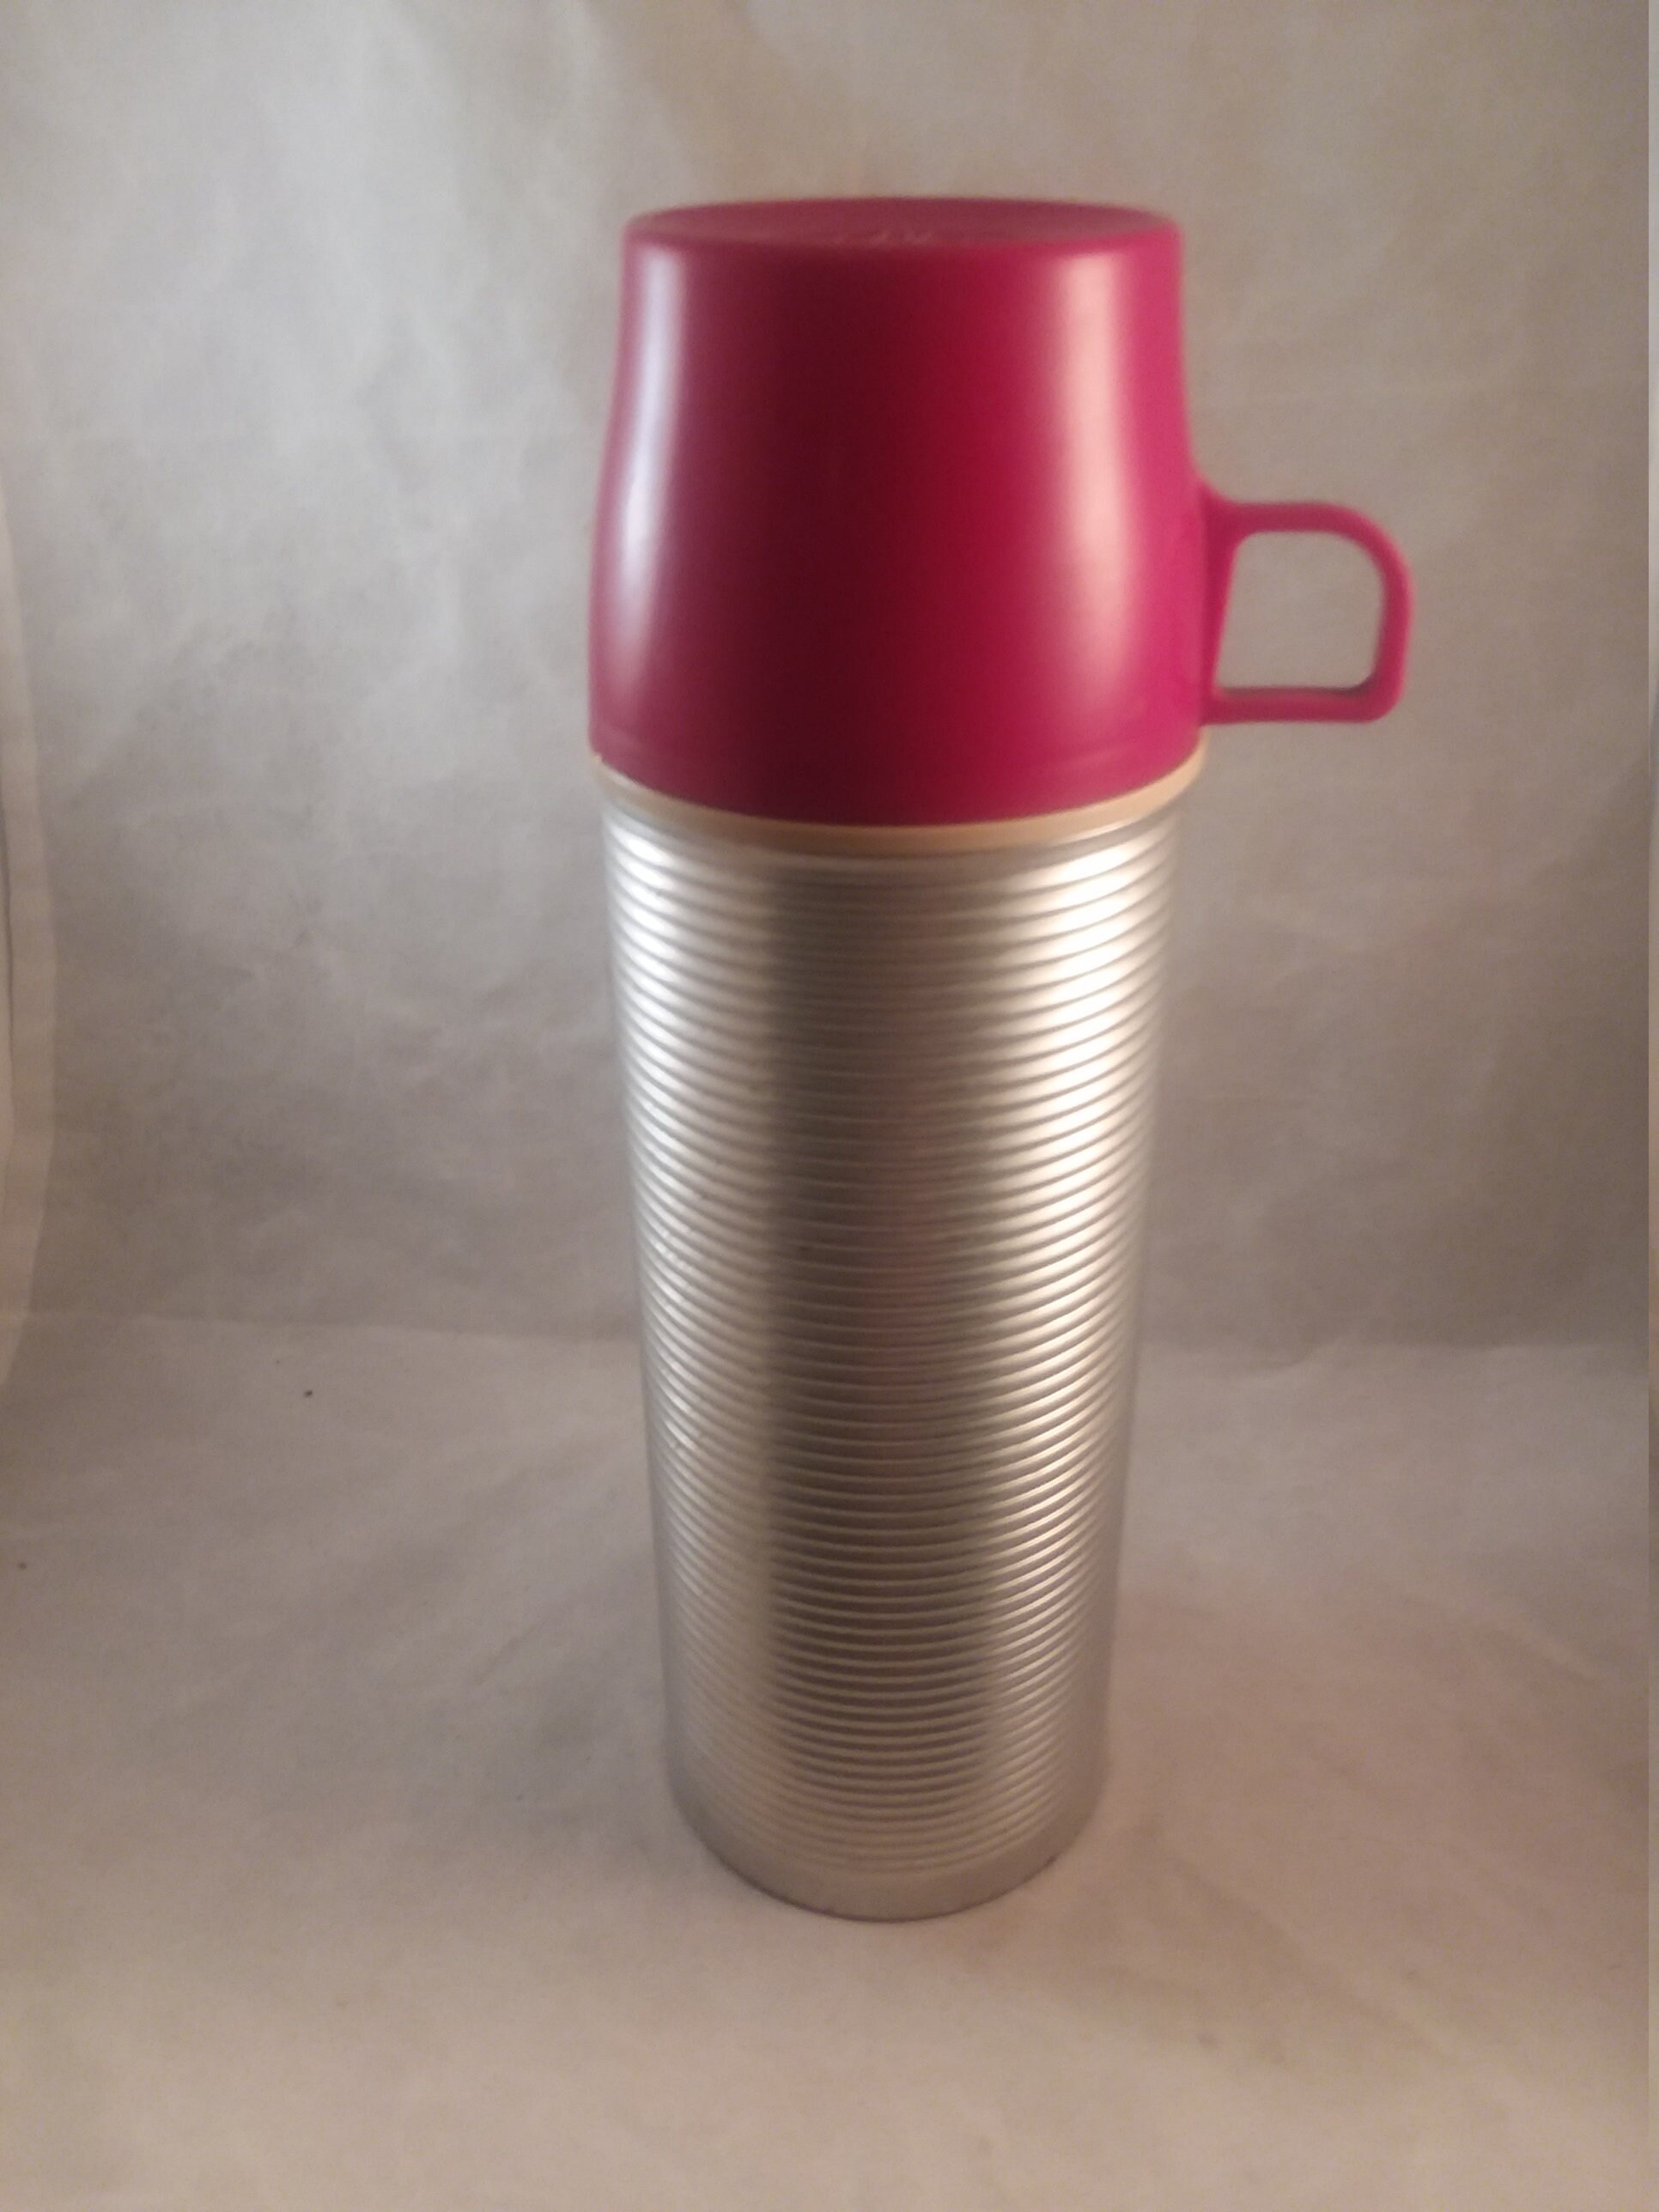 VINTAGE THERMOS BRAND GLASS LINED THERMOS W/RED CAP 2284 RIBBED MADE IN USA